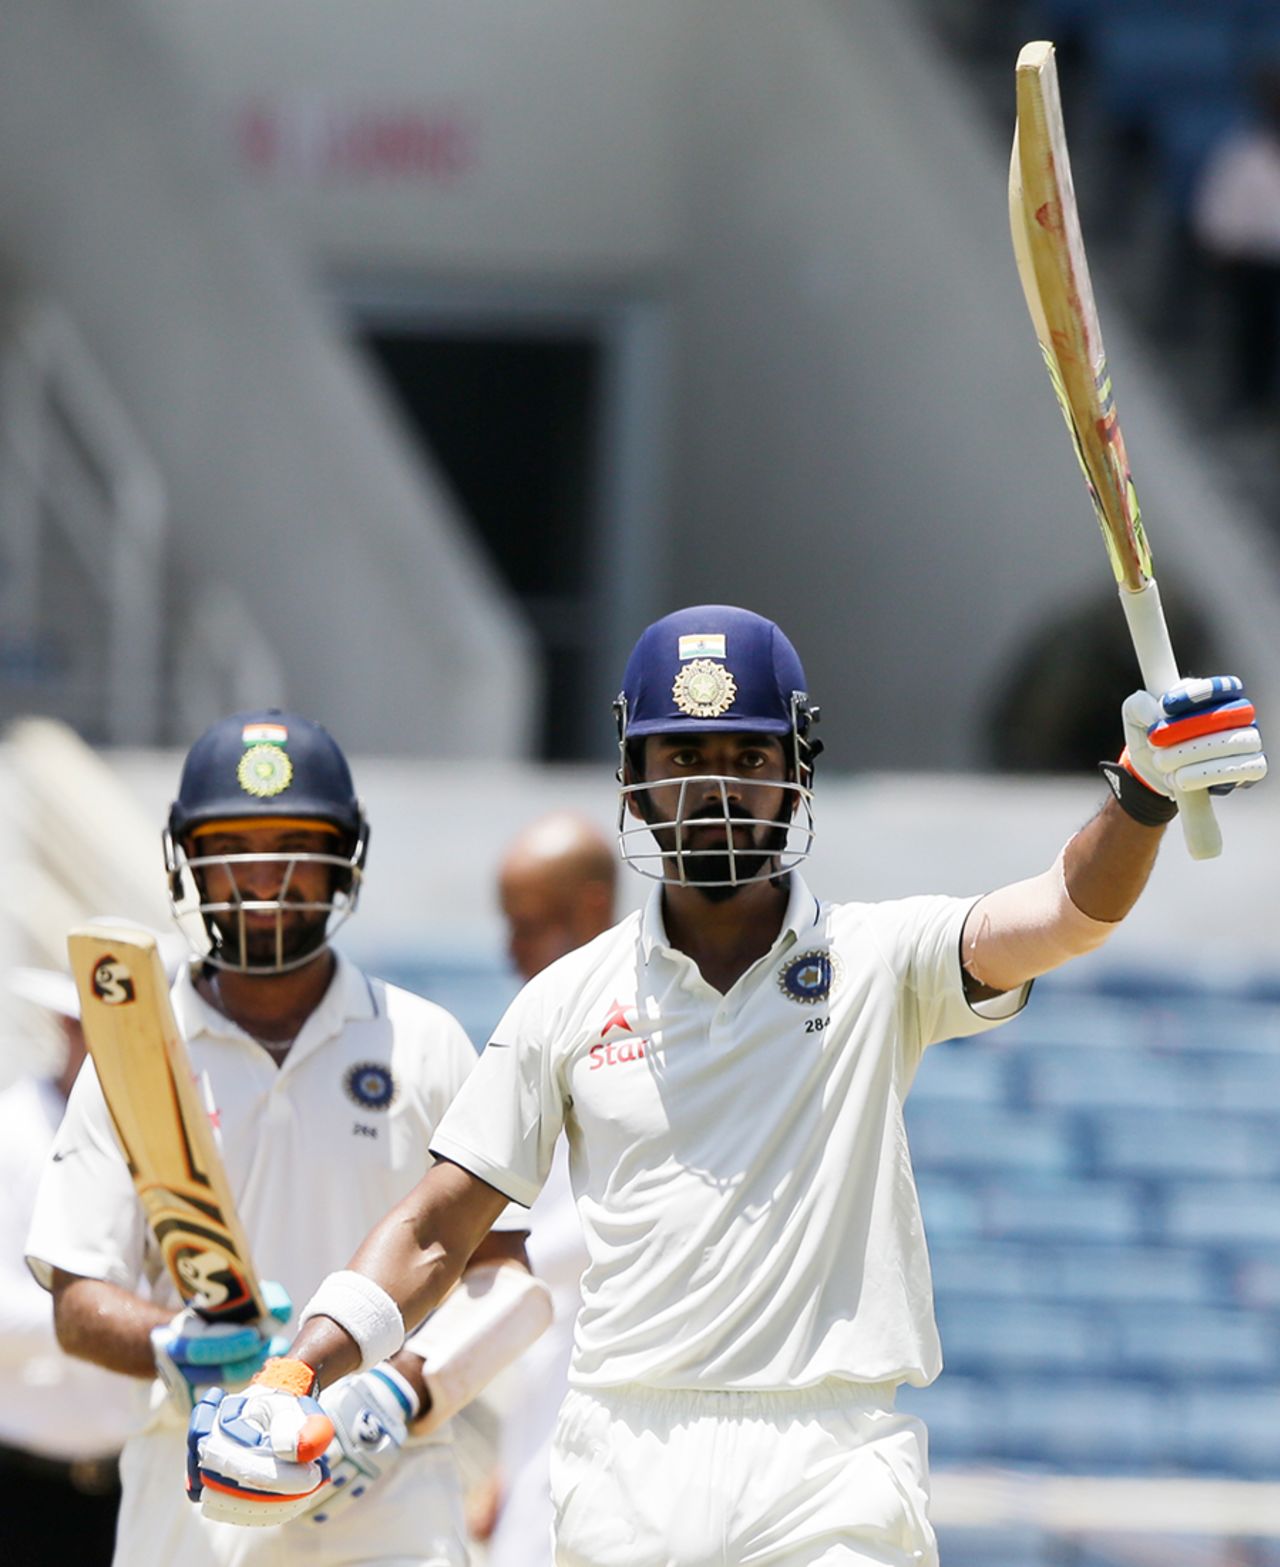 KL Rahul celebrates after reaching his third Test century, West Indies v India, 2nd Test, Kingston, 2nd day, July 31, 2016